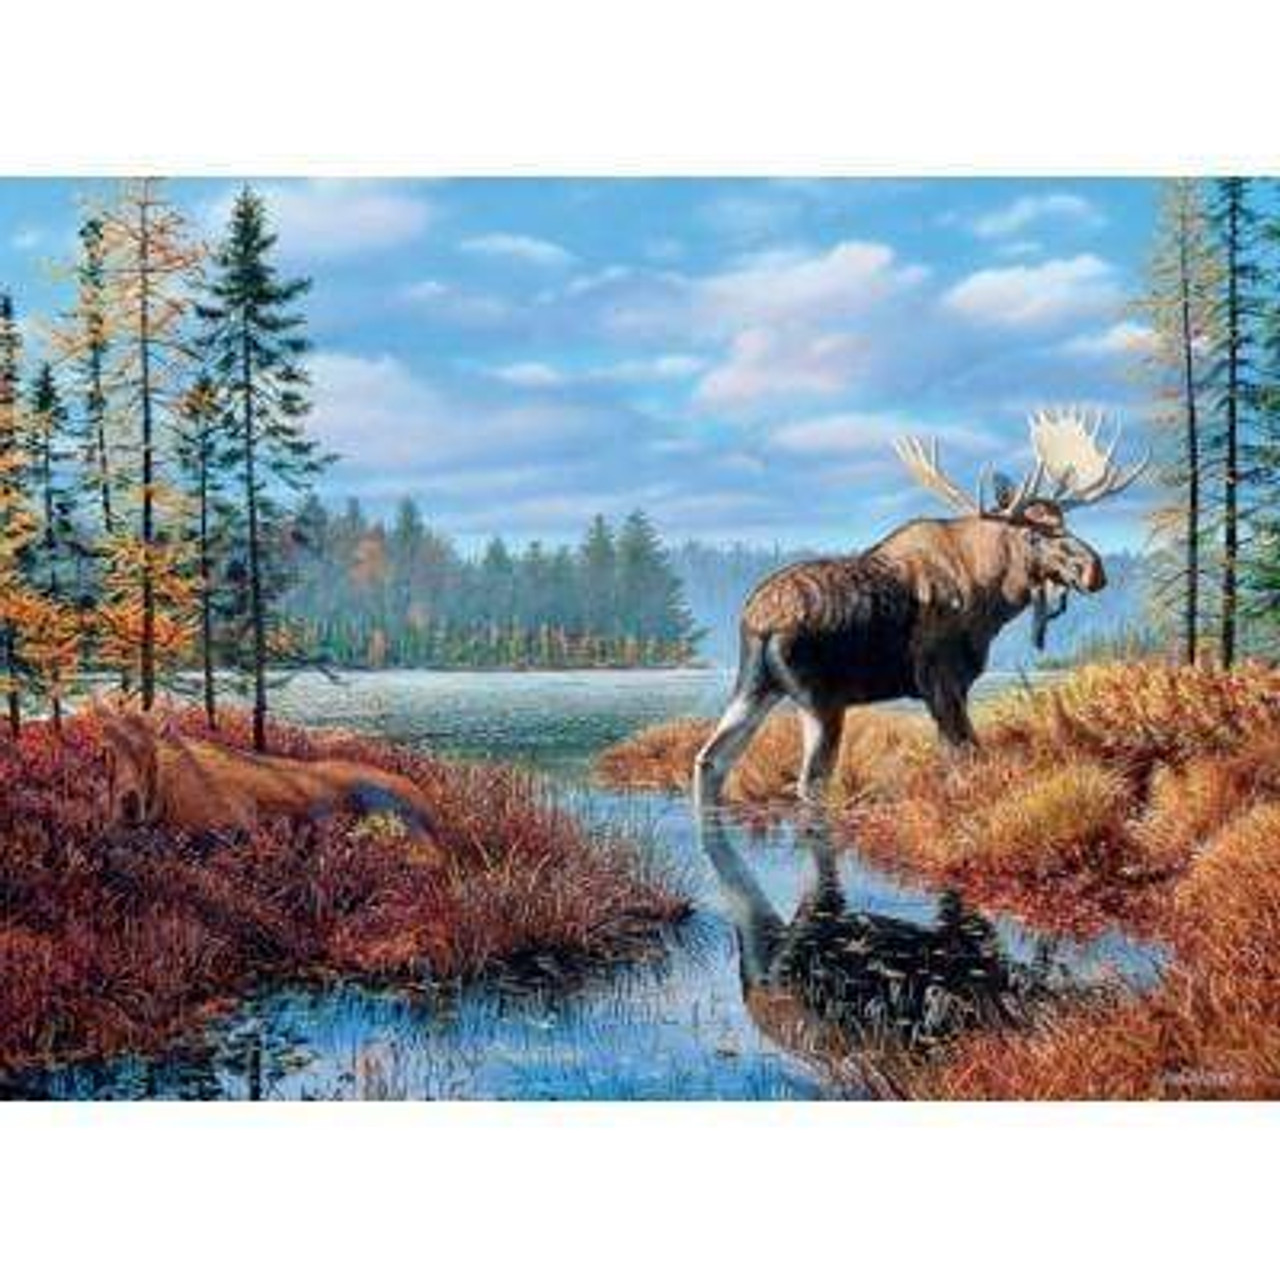 Diymood DIY 5D Diamond Painting by Number Kits, Diamond Painting Moose  Winter Forest Paint with Diamonds Arts for Adults Full Drill Canvas Picture  for